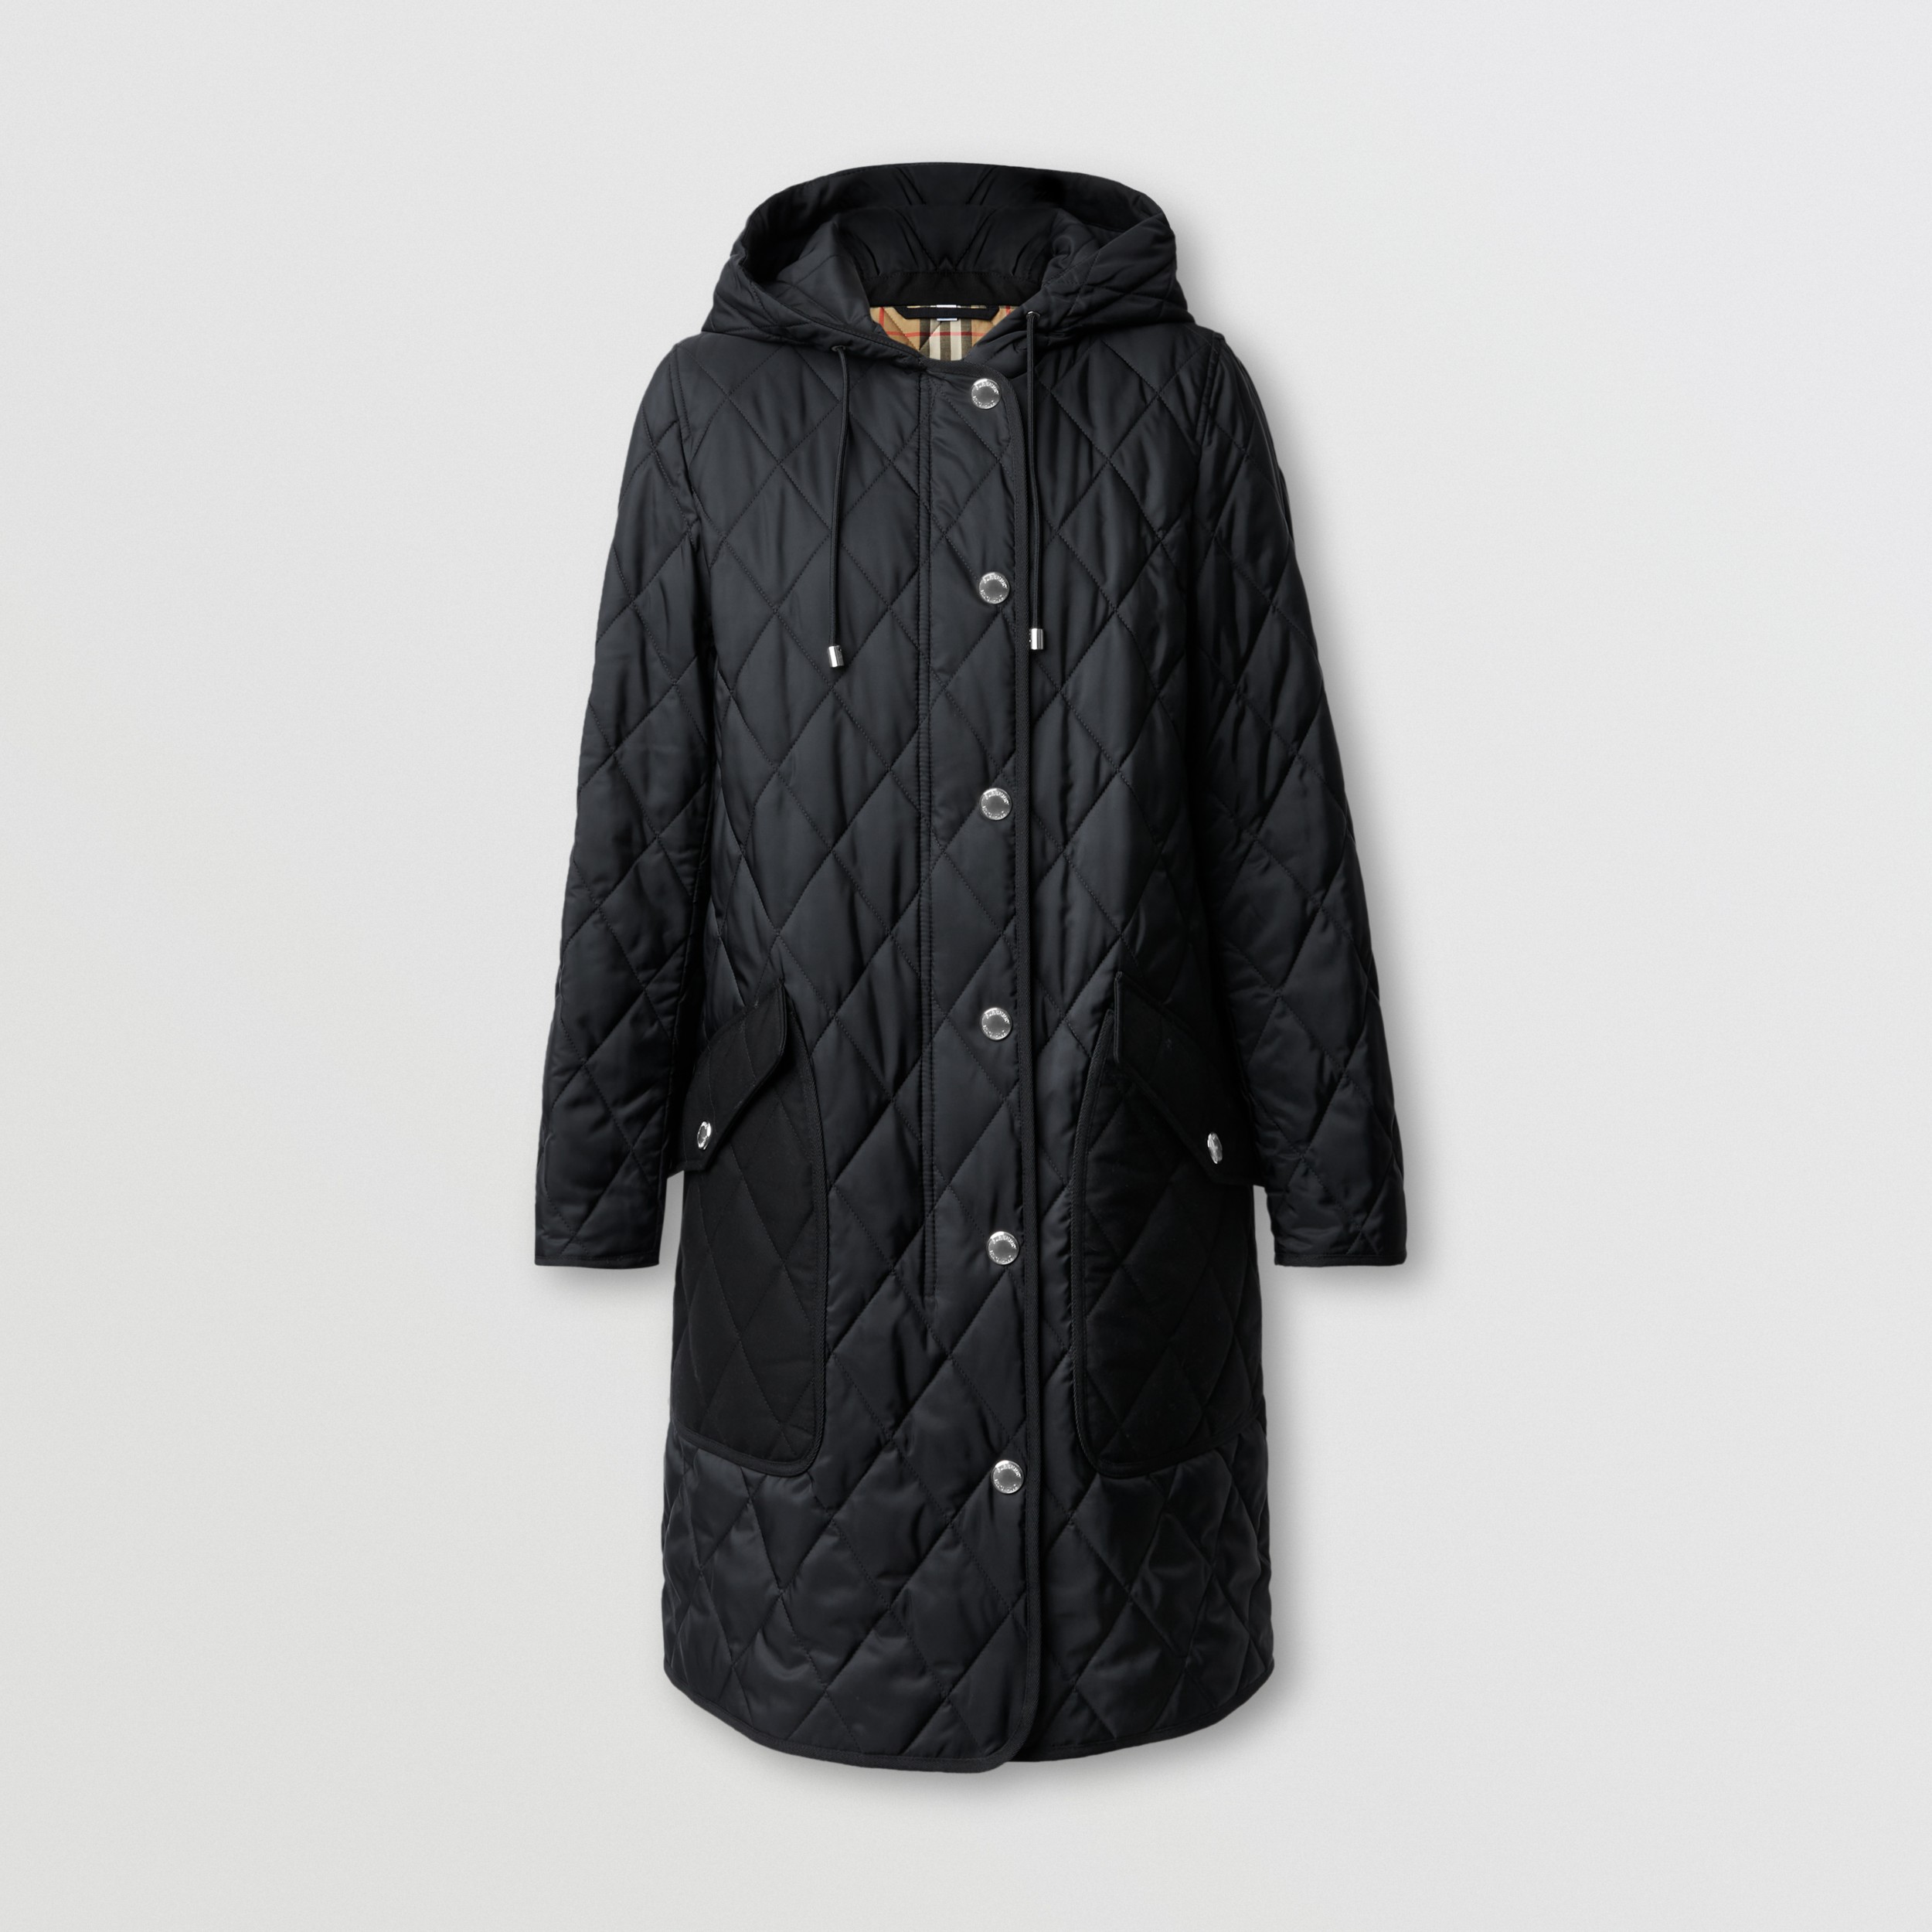 Diamond Quilted Thermoregulated Hooded Coat in Black - Women | Burberry Hong Kong China